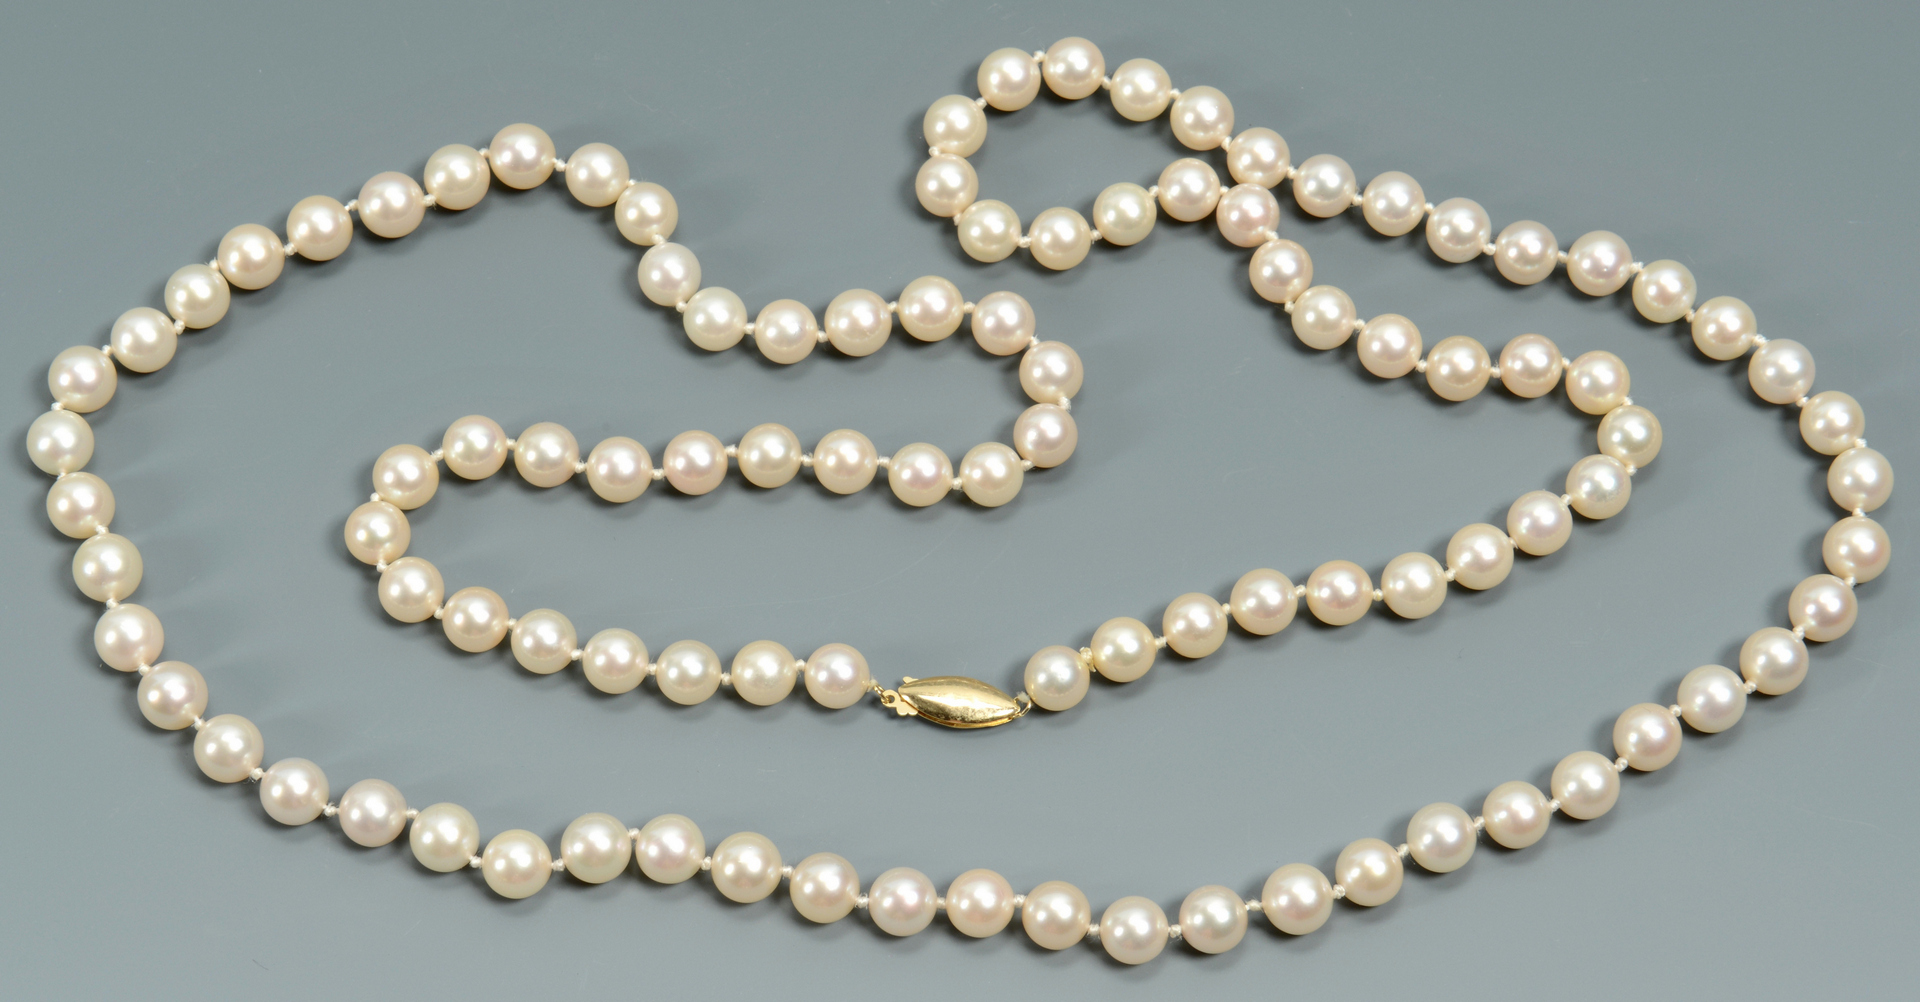 Lot 3088213: Long 8mm Cultured Pearl Necklace, 38"